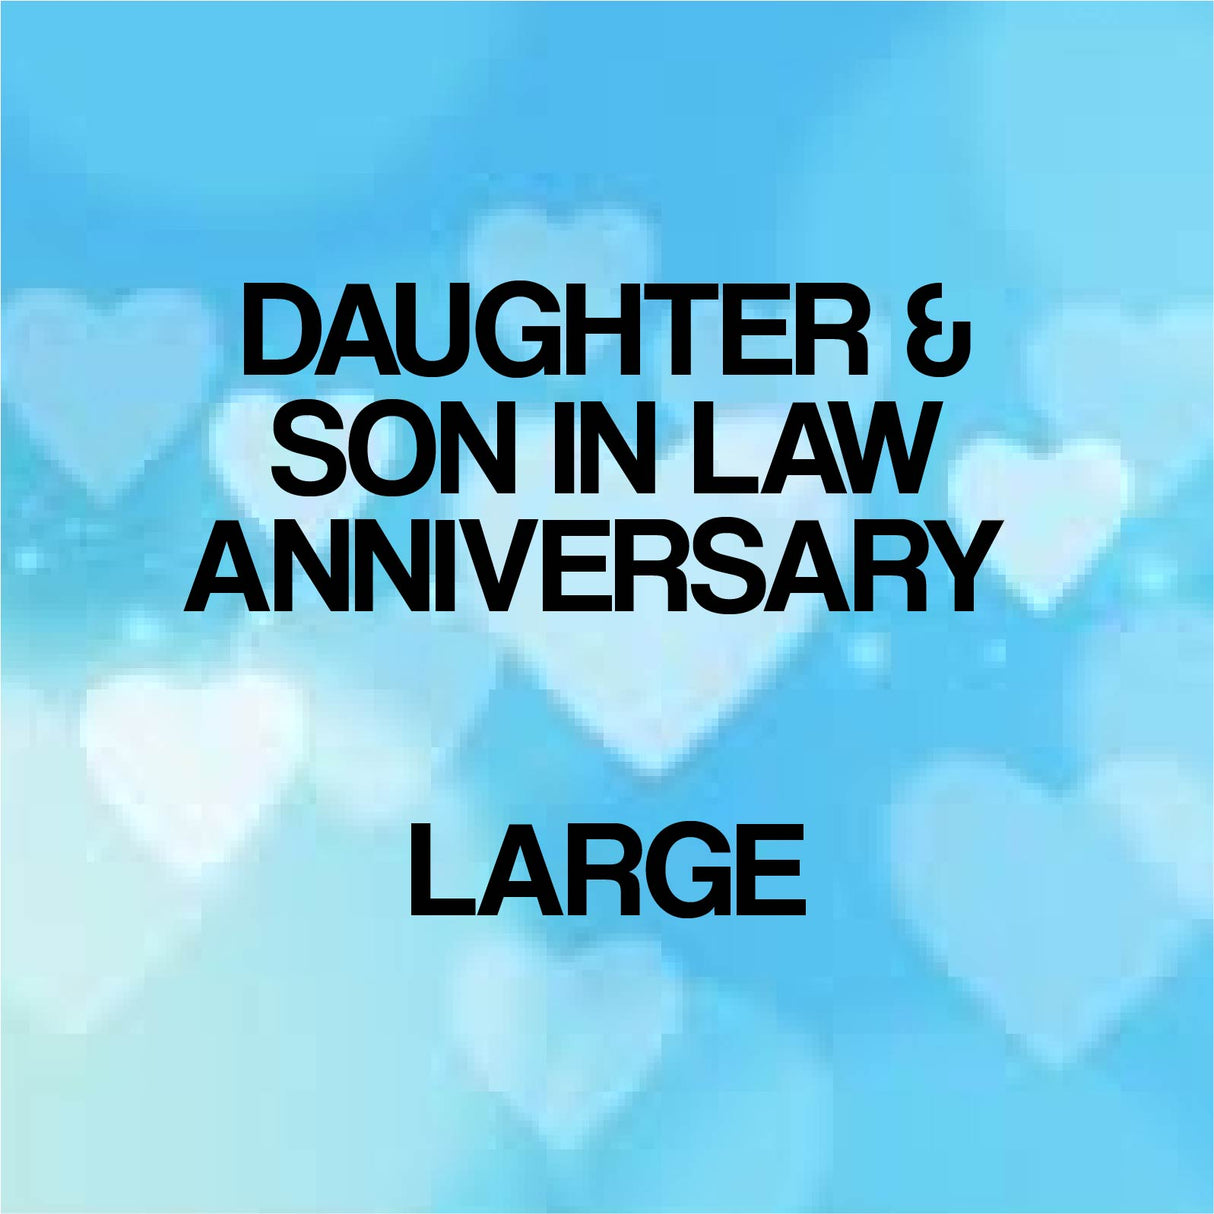 Daughter & Son In Law Anniversary